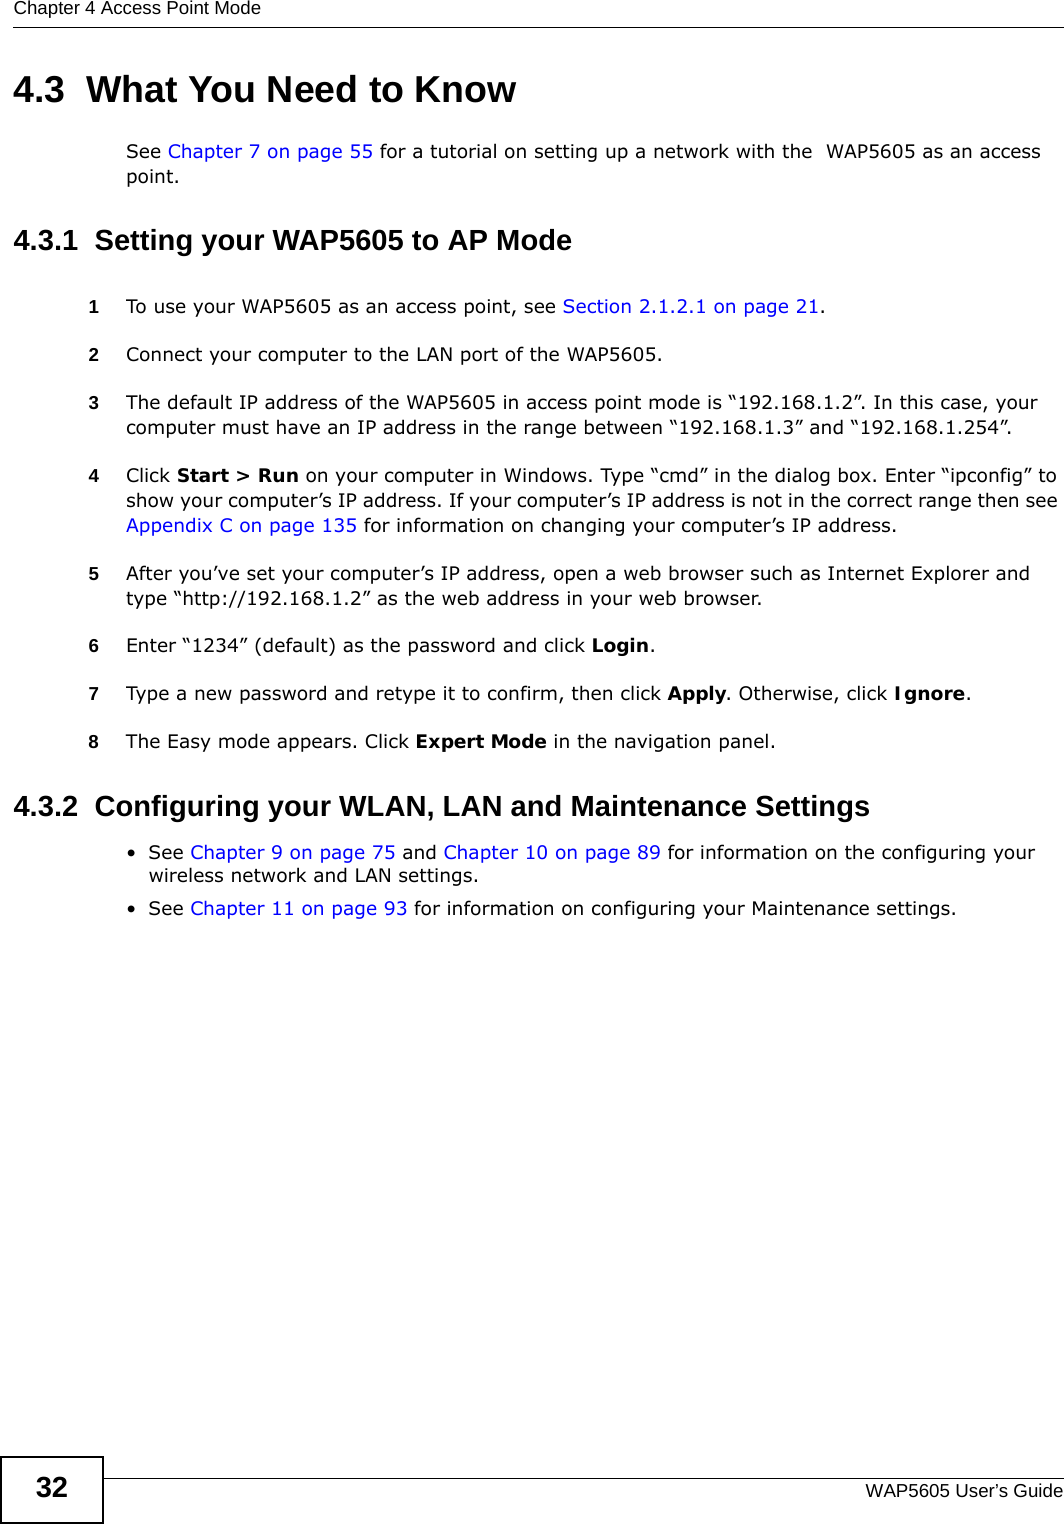 Chapter 4 Access Point ModeWAP5605 User’s Guide324.3  What You Need to KnowSee Chapter 7 on page 55 for a tutorial on setting up a network with the  WAP5605 as an access point.4.3.1  Setting your WAP5605 to AP Mode1To use your WAP5605 as an access point, see Section 2.1.2.1 on page 21.2Connect your computer to the LAN port of the WAP5605. 3The default IP address of the WAP5605 in access point mode is “192.168.1.2”. In this case, your computer must have an IP address in the range between “192.168.1.3” and “192.168.1.254”.4Click Start &gt; Run on your computer in Windows. Type “cmd” in the dialog box. Enter “ipconfig” to show your computer’s IP address. If your computer’s IP address is not in the correct range then see Appendix C on page 135 for information on changing your computer’s IP address.5After you’ve set your computer’s IP address, open a web browser such as Internet Explorer and type “http://192.168.1.2” as the web address in your web browser.6Enter “1234” (default) as the password and click Login.7Type a new password and retype it to confirm, then click Apply. Otherwise, click Ignore.8The Easy mode appears. Click Expert Mode in the navigation panel.4.3.2  Configuring your WLAN, LAN and Maintenance Settings•See Chapter 9 on page 75 and Chapter 10 on page 89 for information on the configuring your wireless network and LAN settings.•See Chapter 11 on page 93 for information on configuring your Maintenance settings. 